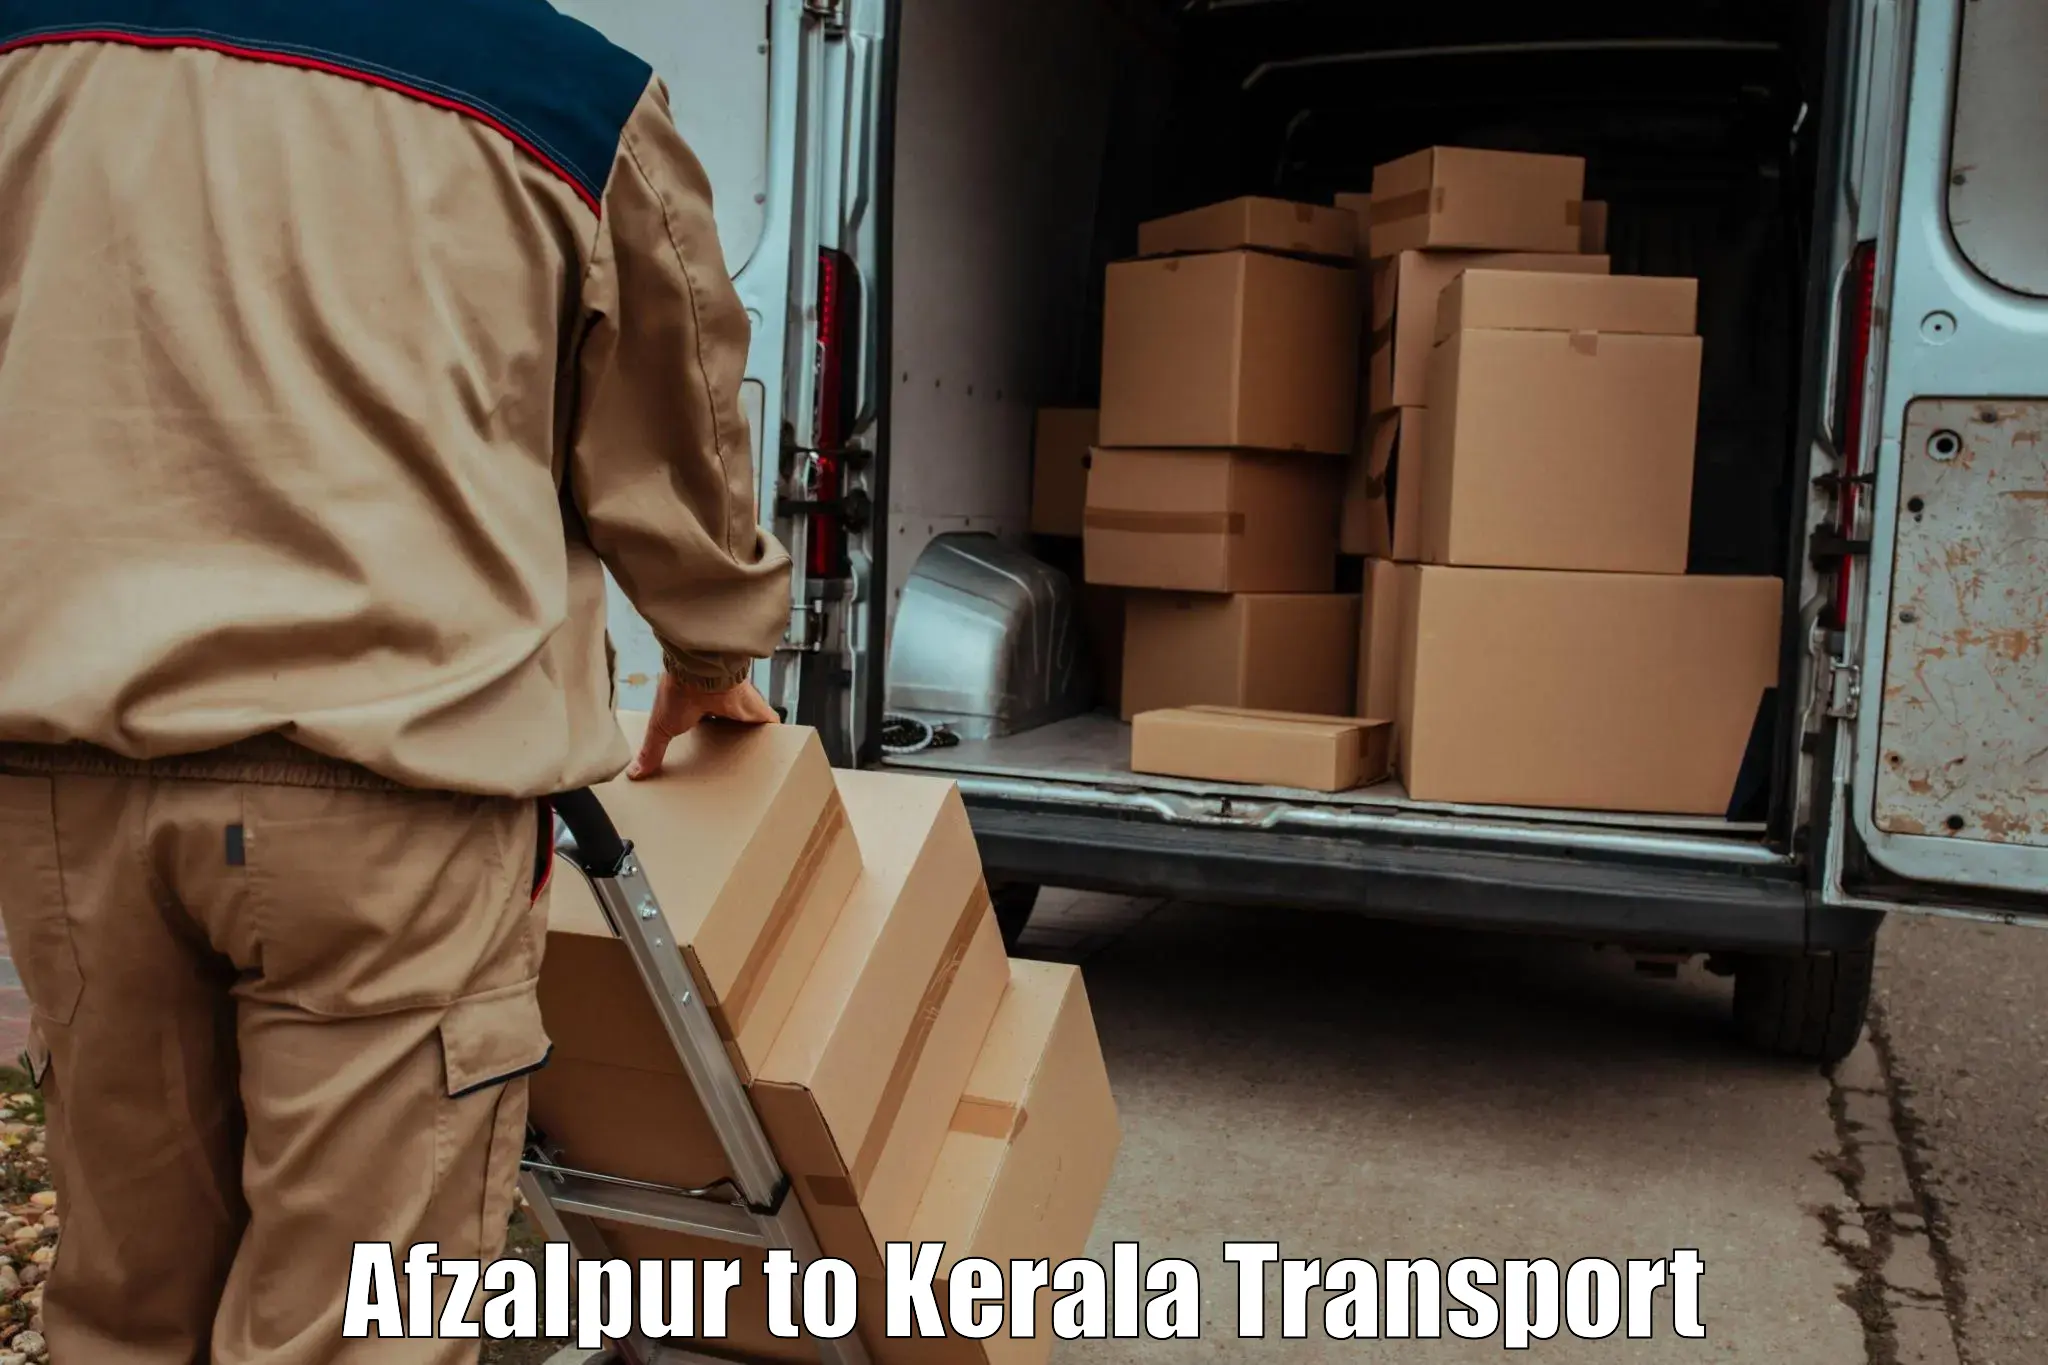 Transport bike from one state to another Afzalpur to Kerala